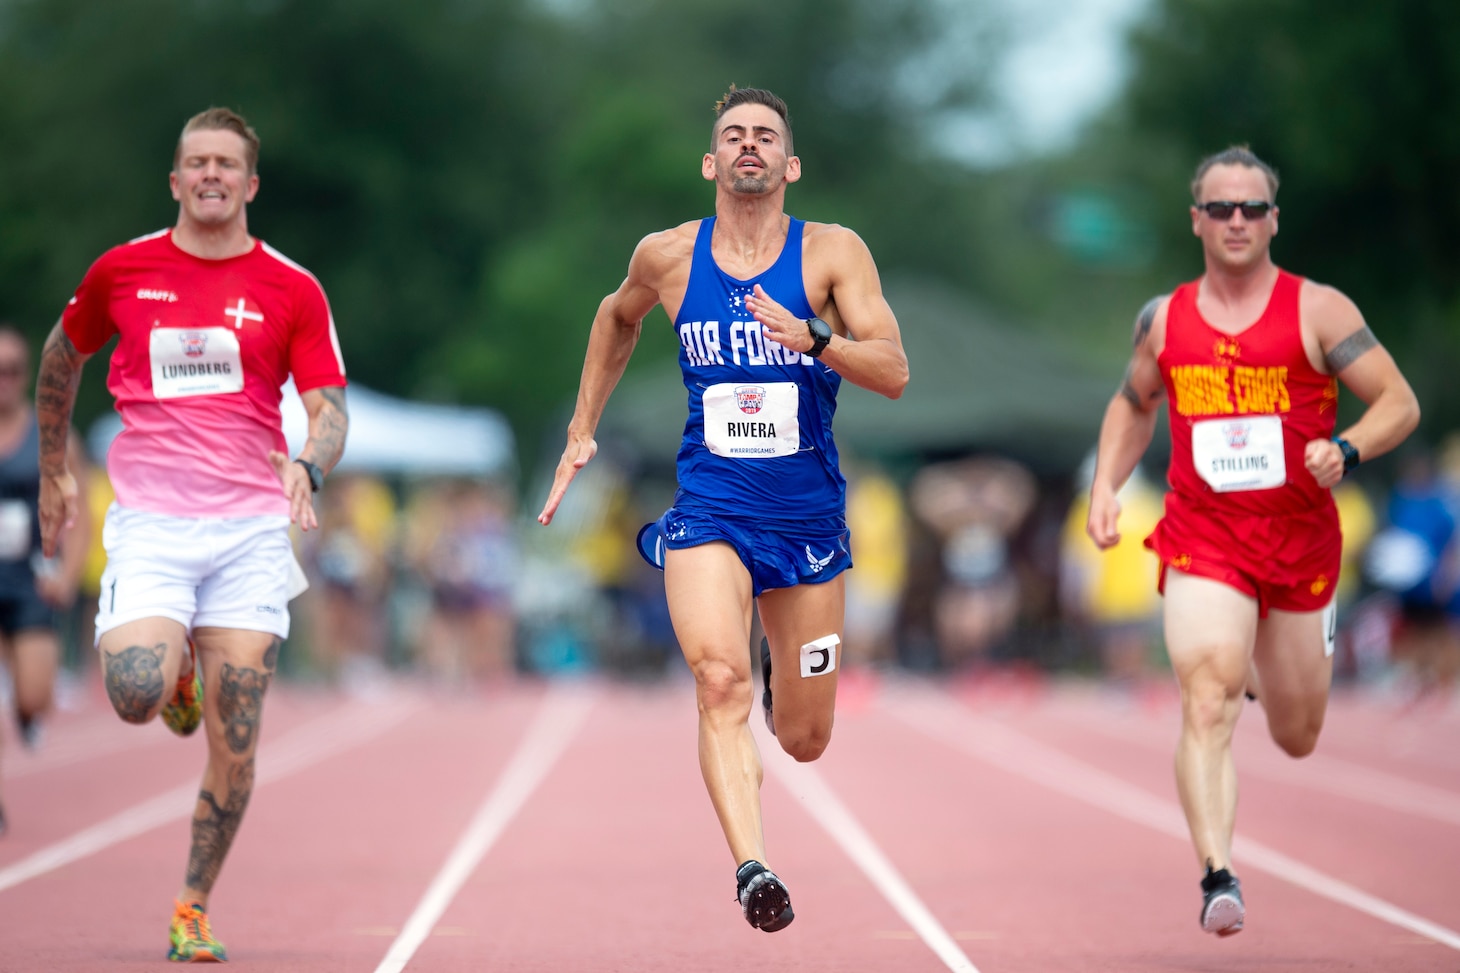 Three male runners sprint down a track, with the background blurred during the 2019 Warrior Games